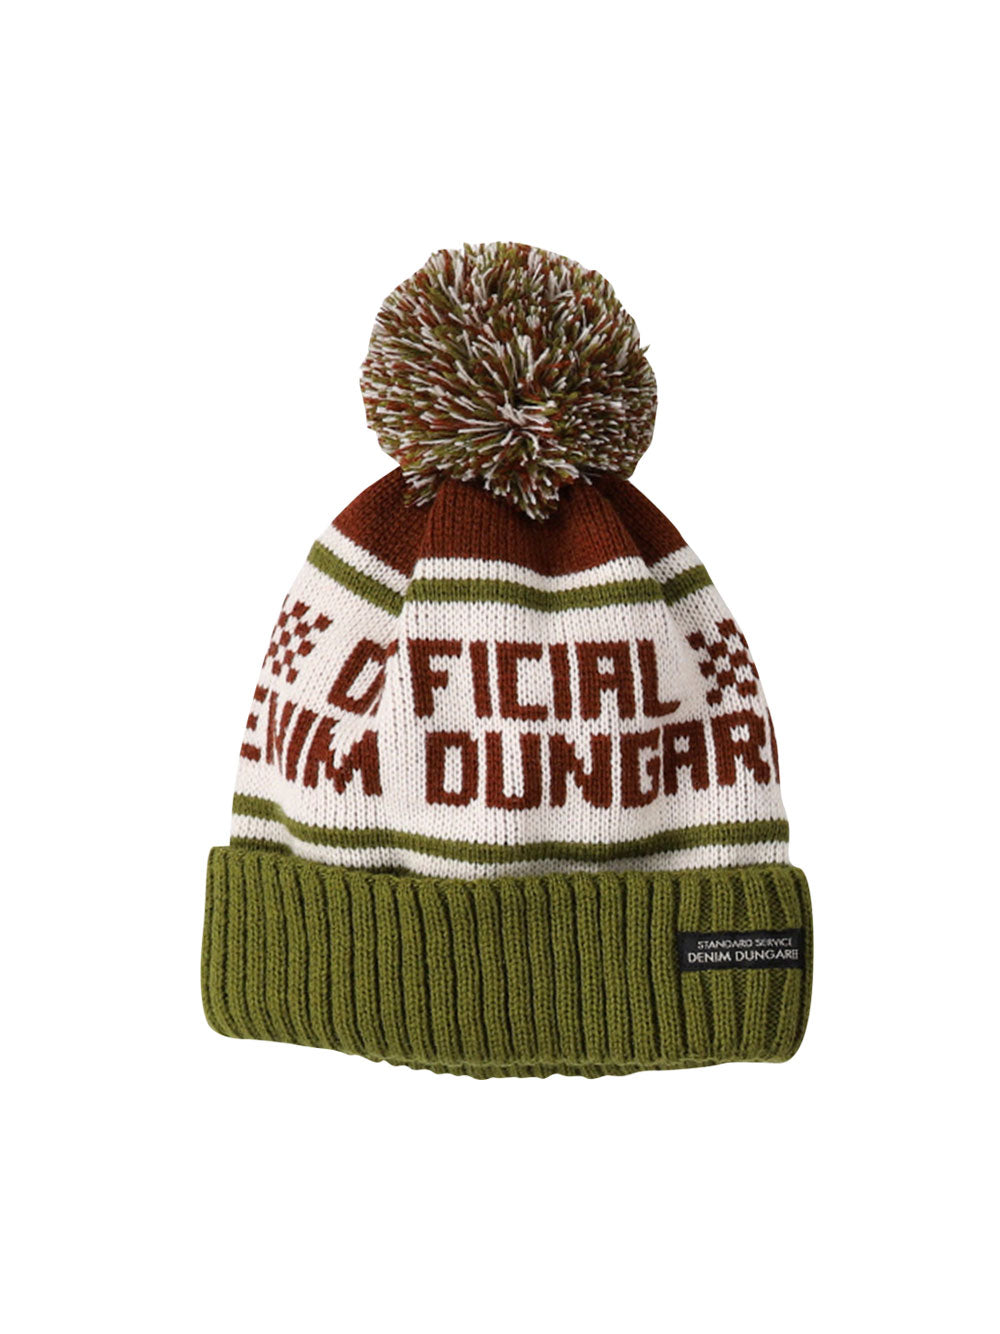 PREORDER: Official Beanie Hat